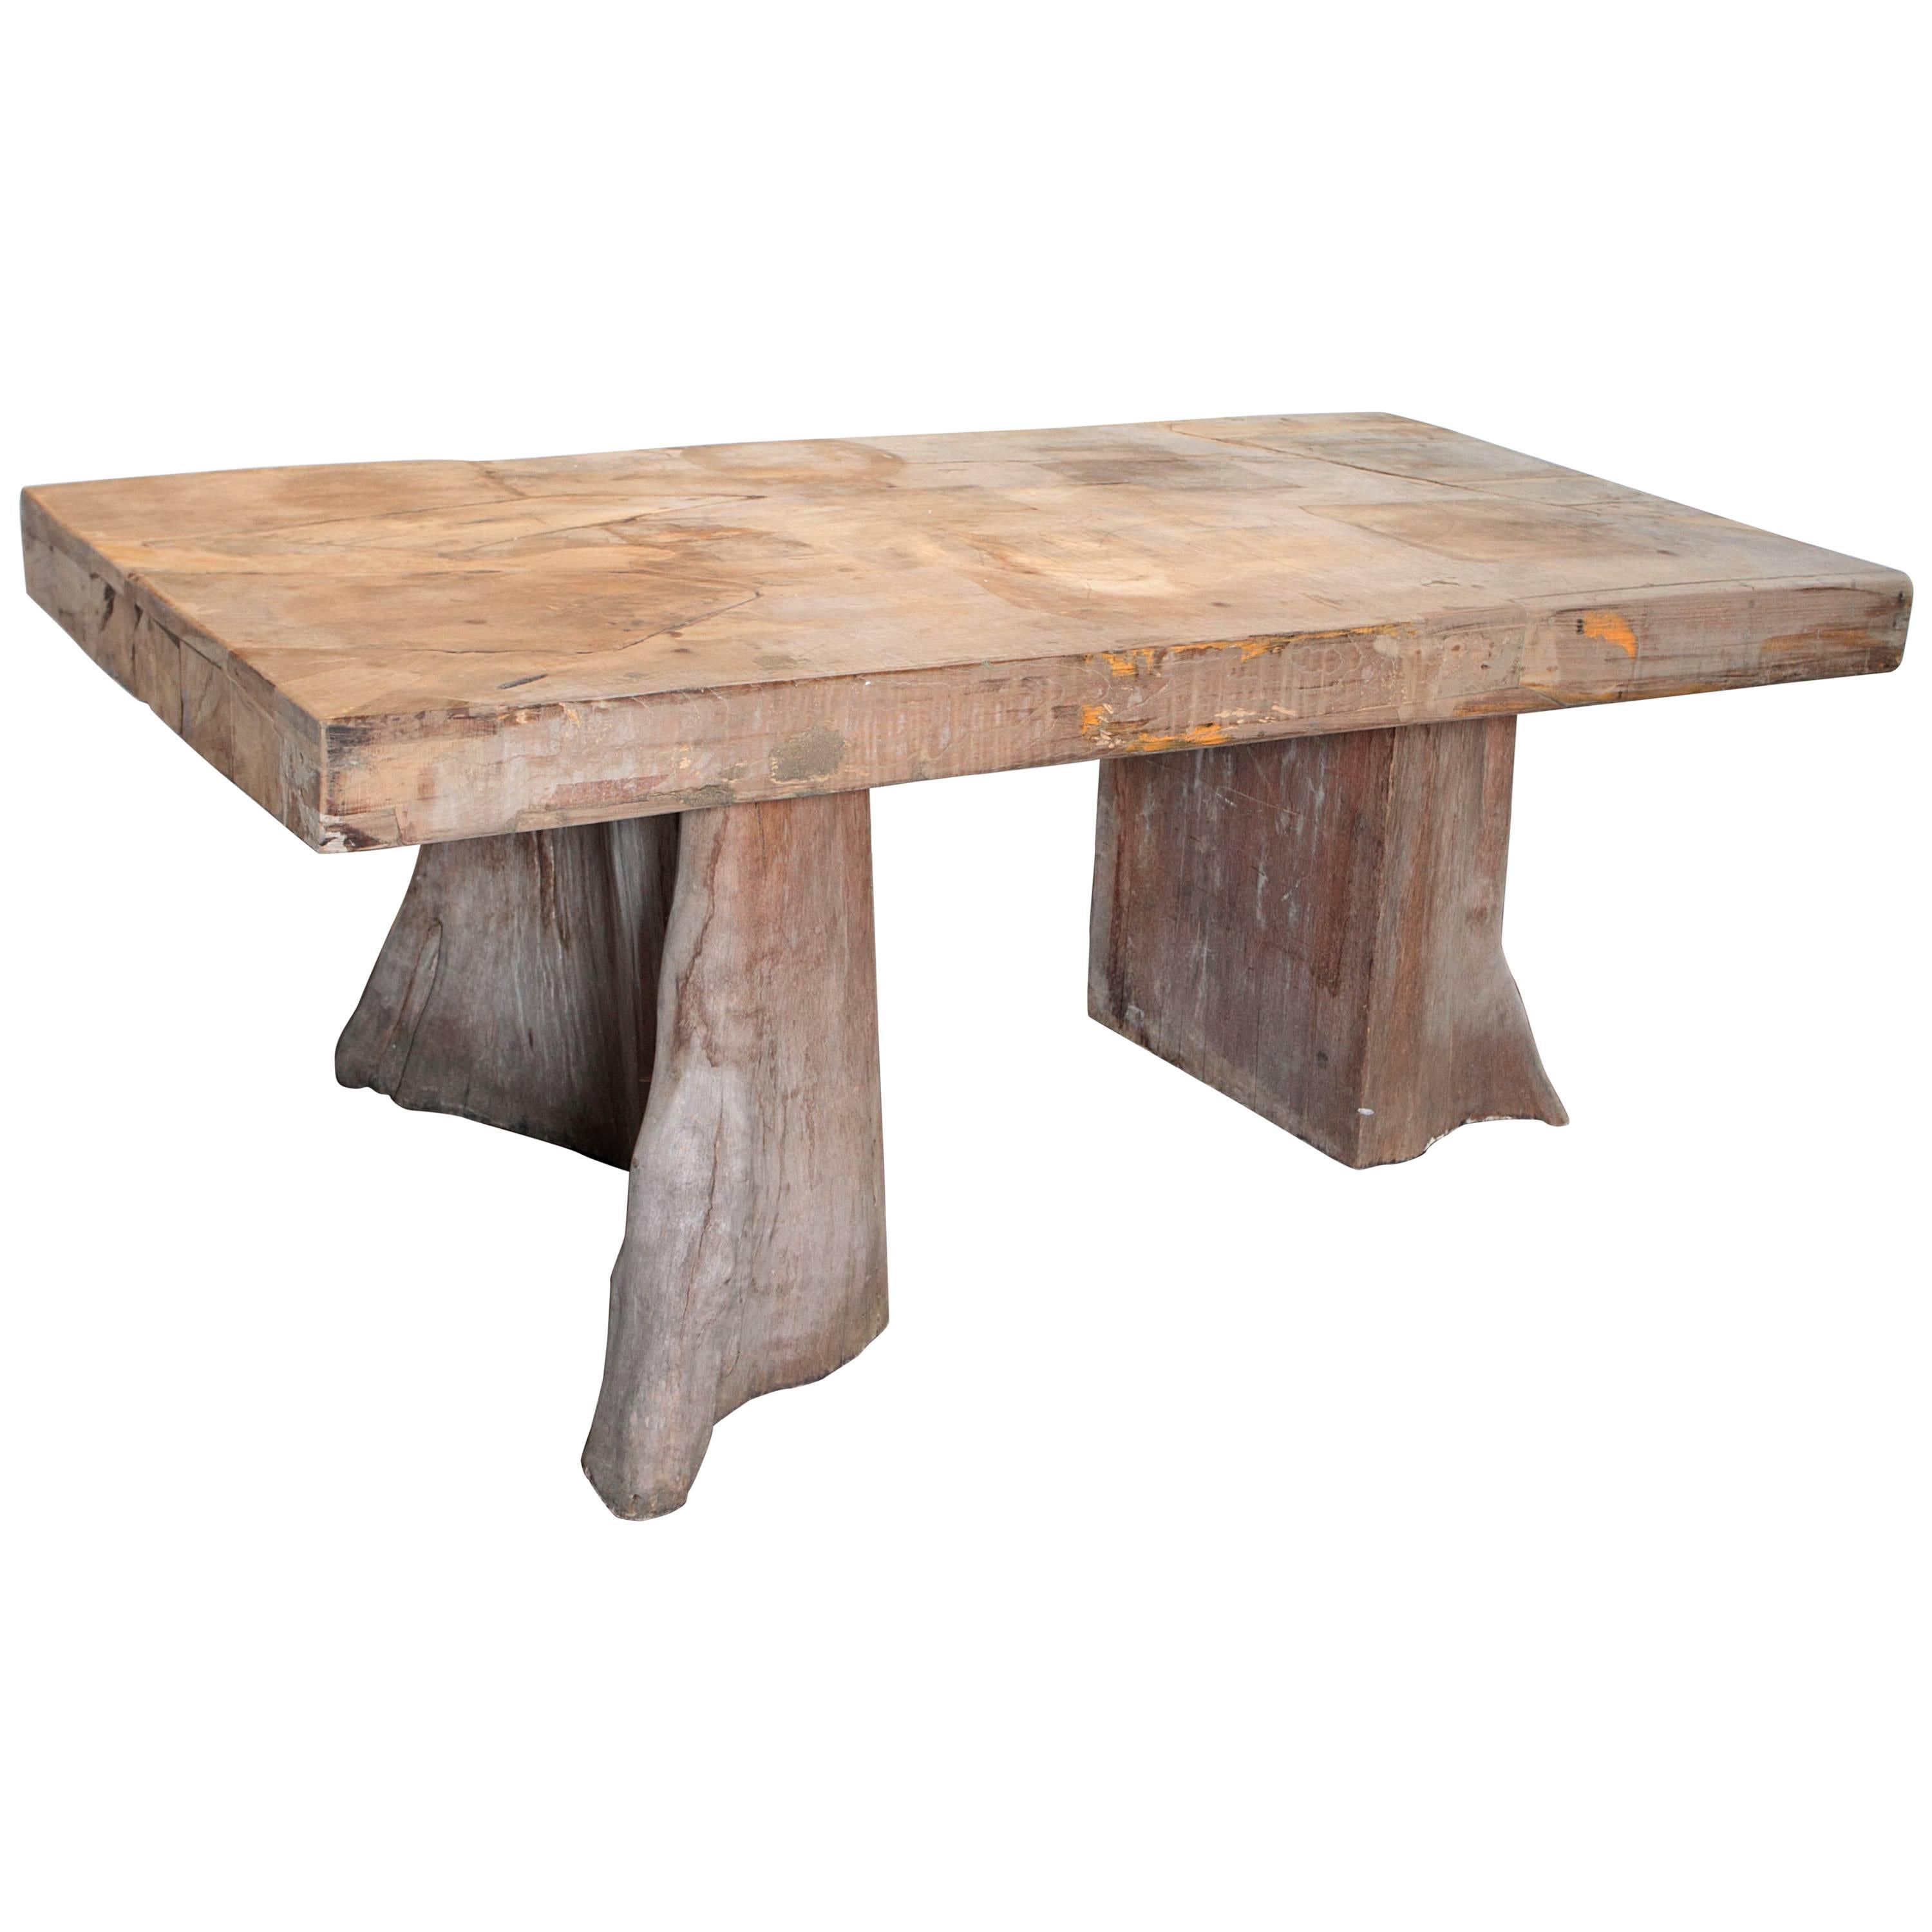 Slab Top Teak Dining Table with Organic Base Supports